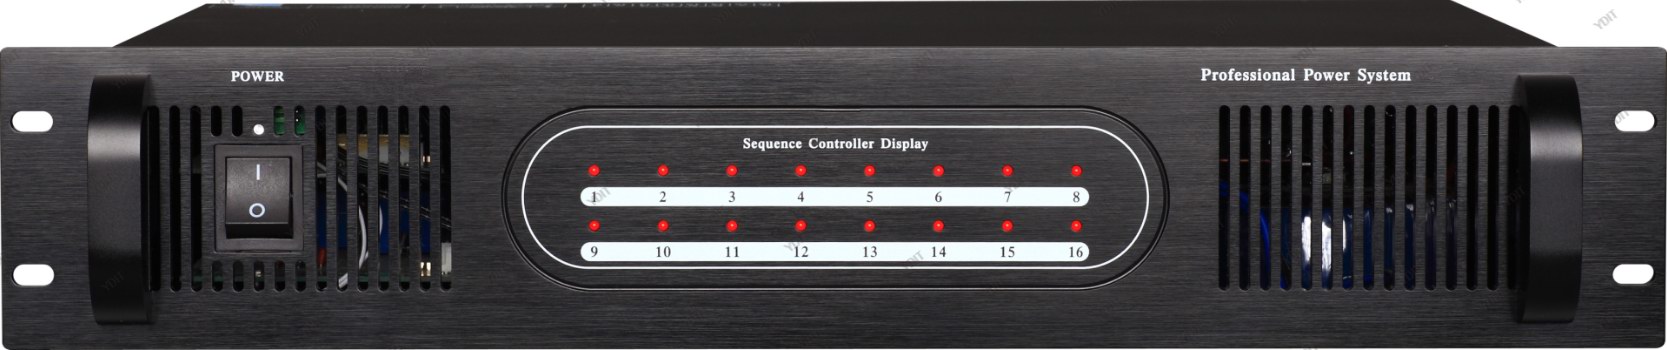 Power sequencer（YH-S306）